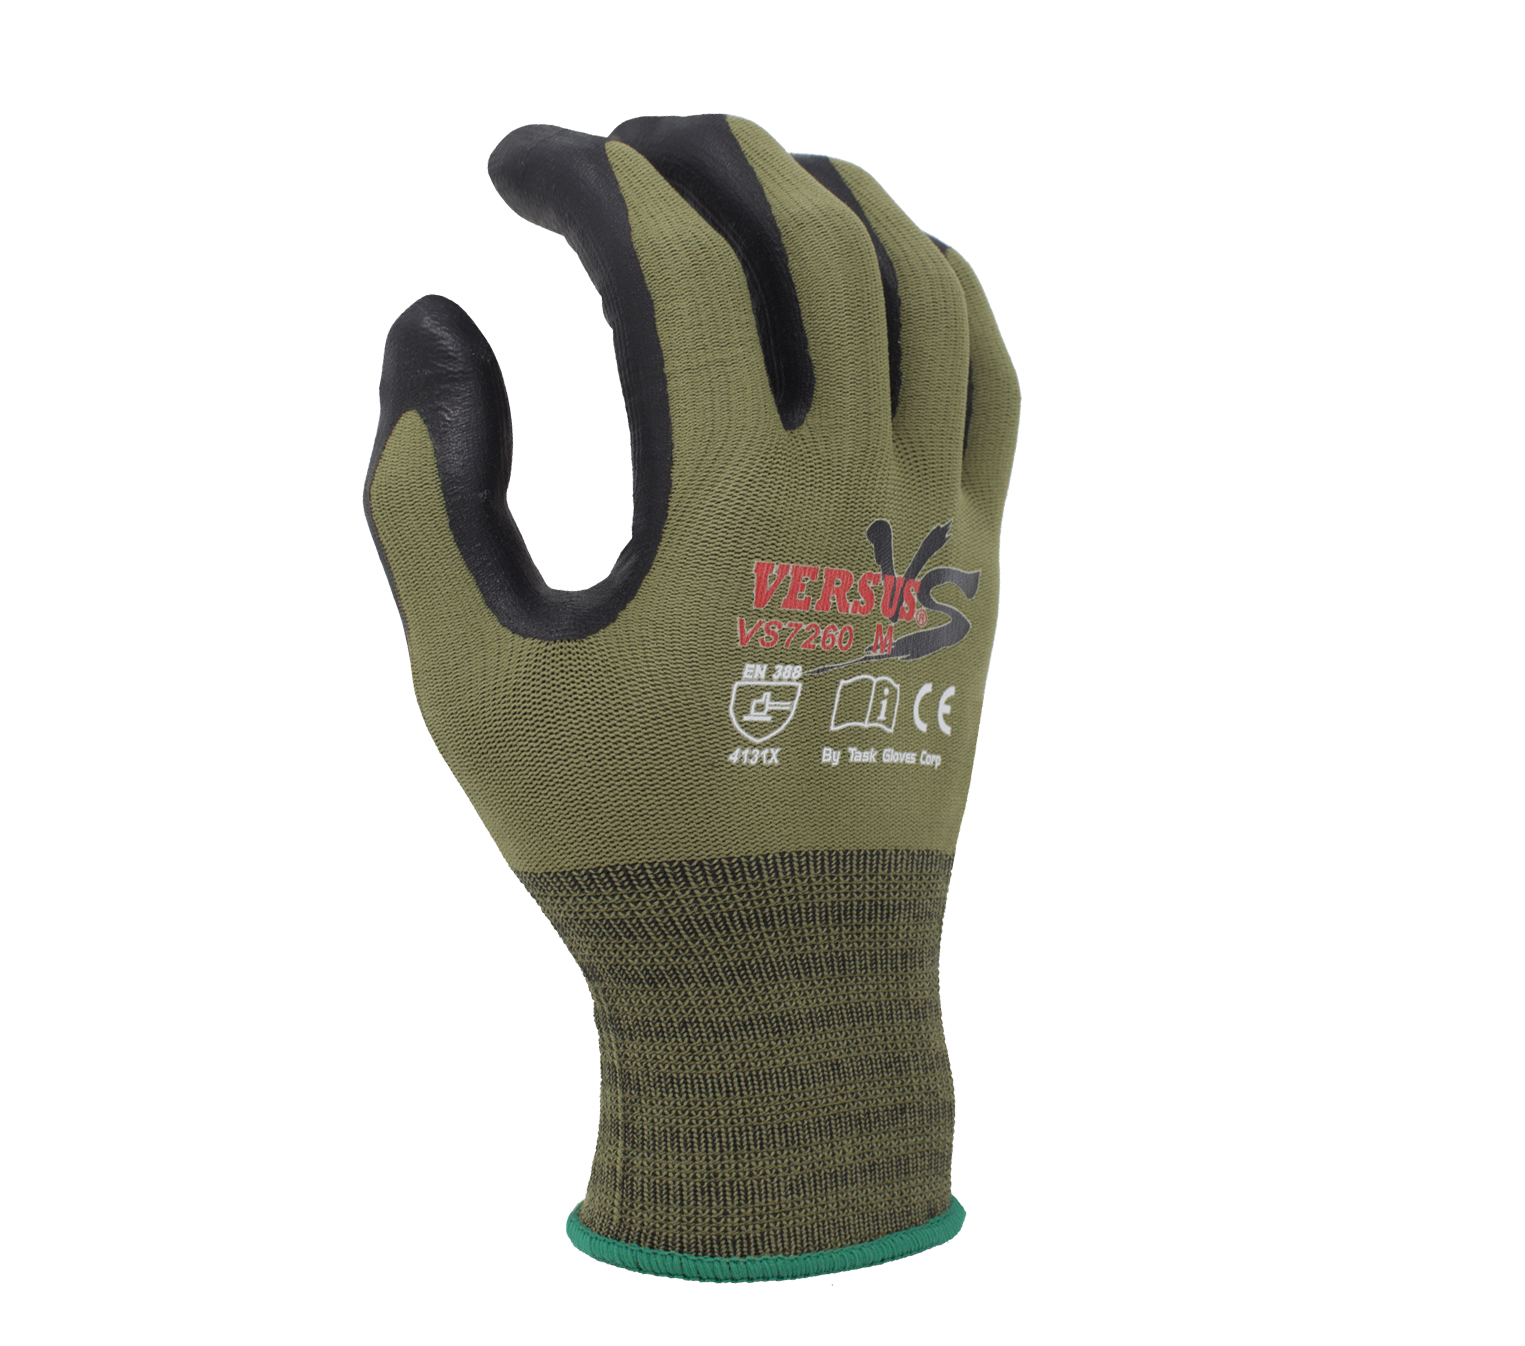 15G Nylon + Spandex Liner, Soft-foam Nitrile Palm Coated Gloves (Three Finger Touch Screen)